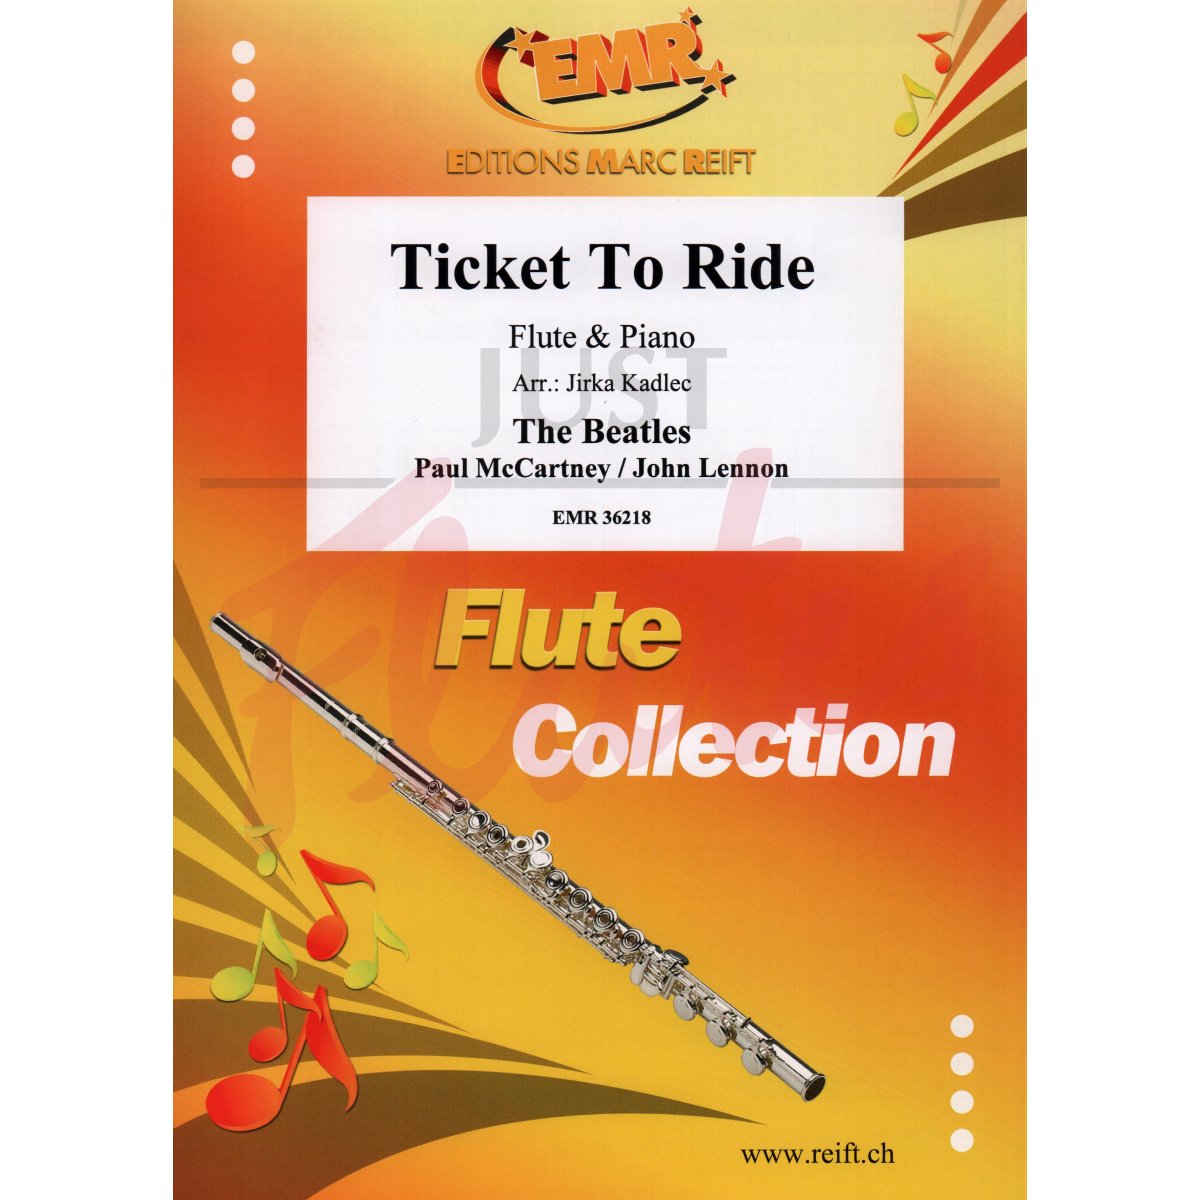 Ticket To Ride for Flute and Piano